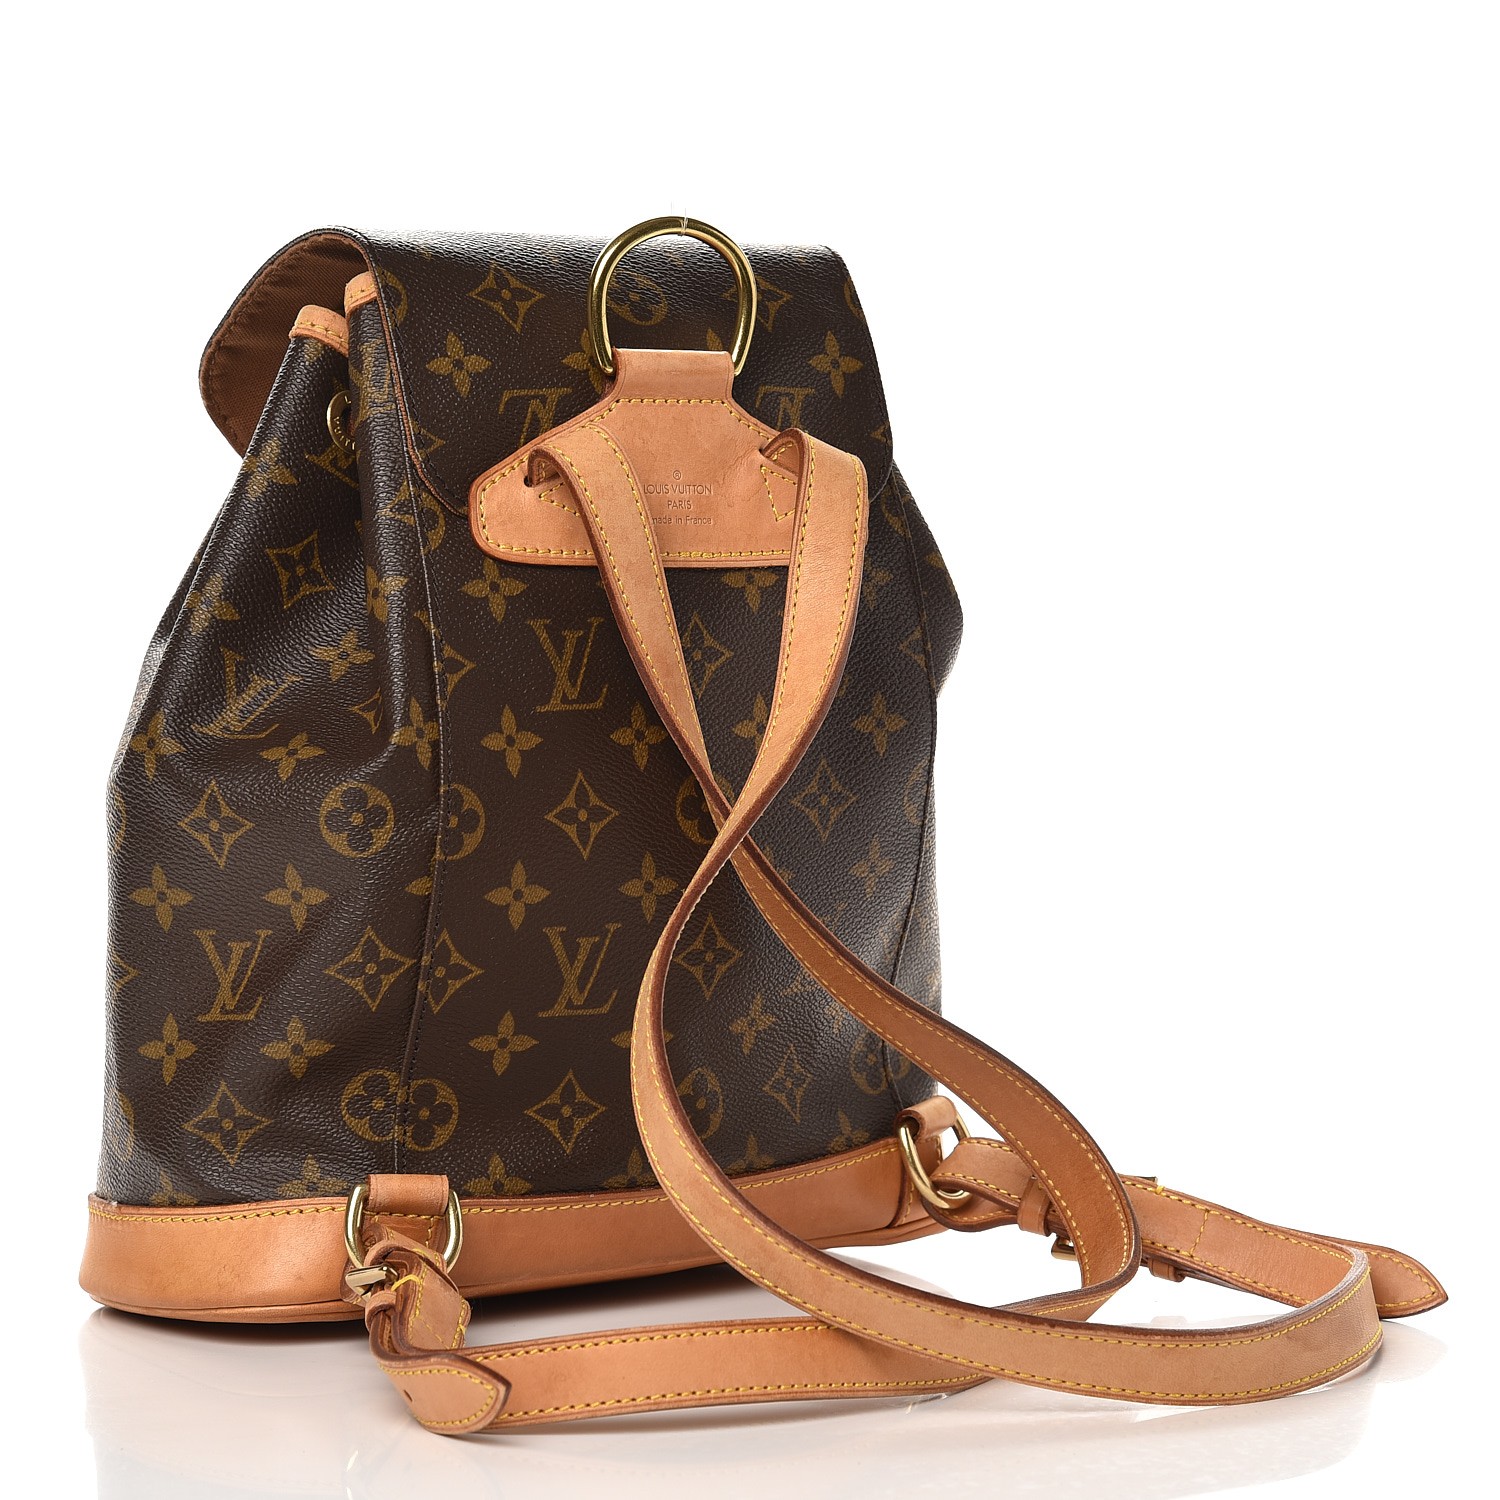 Louis Vuitton, Bags, Lv Monogram Montsouris Backpack Bb Authentic In  Great Condition Wdust Bag